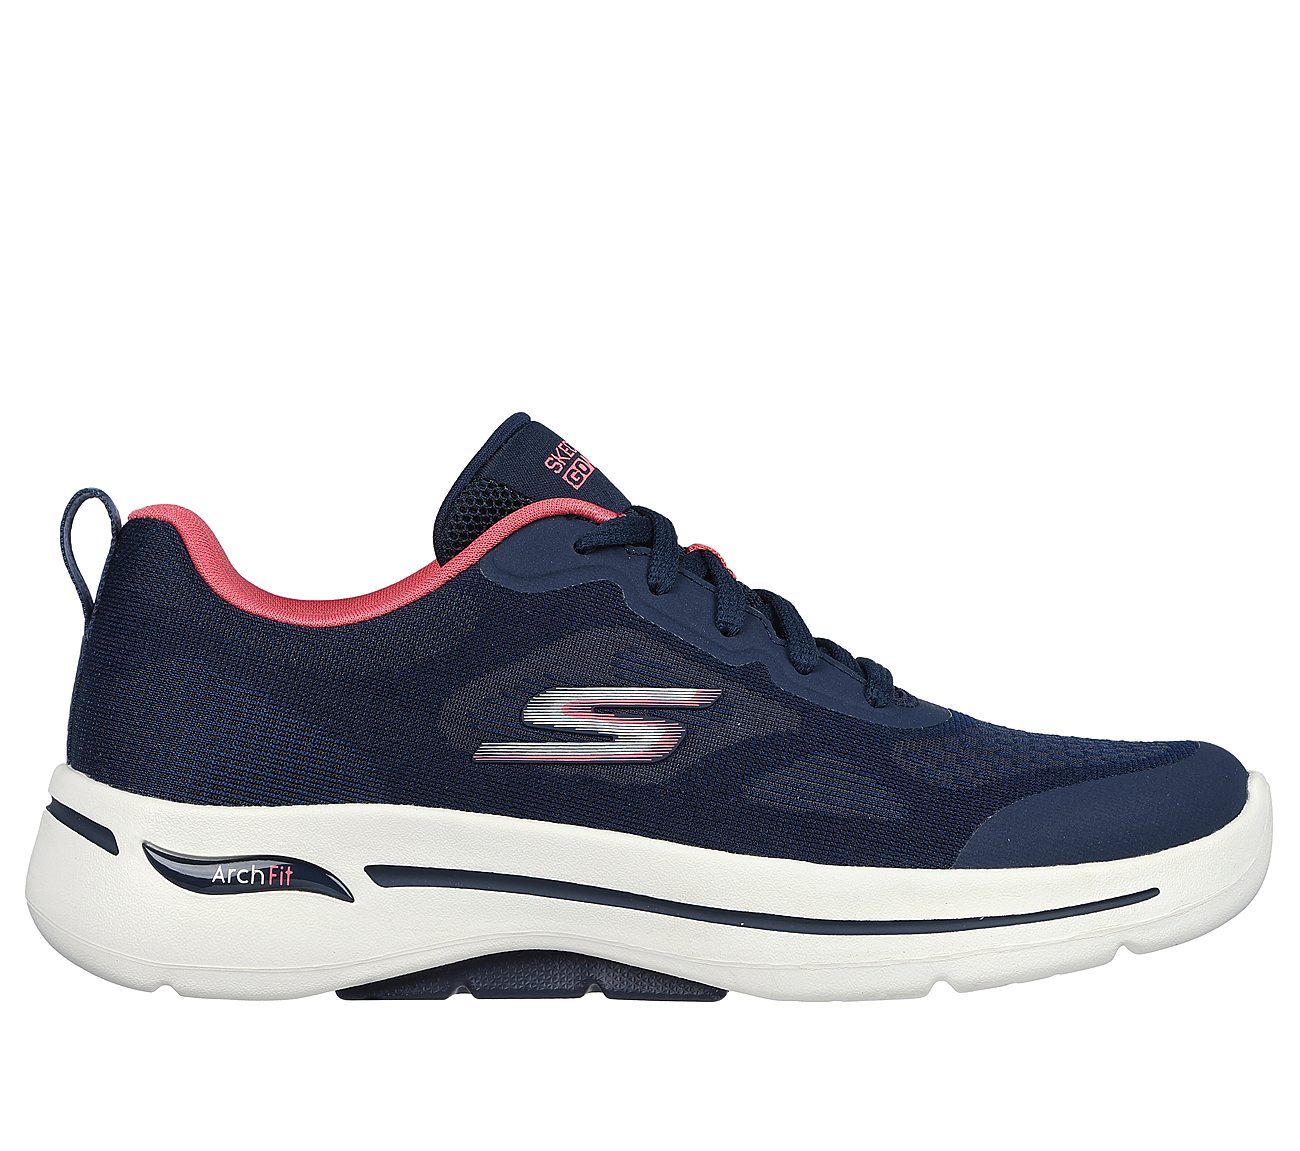 Skechers Navy Go Walk Arch Fit F Womens Lace Up Shoes - Style ID ...